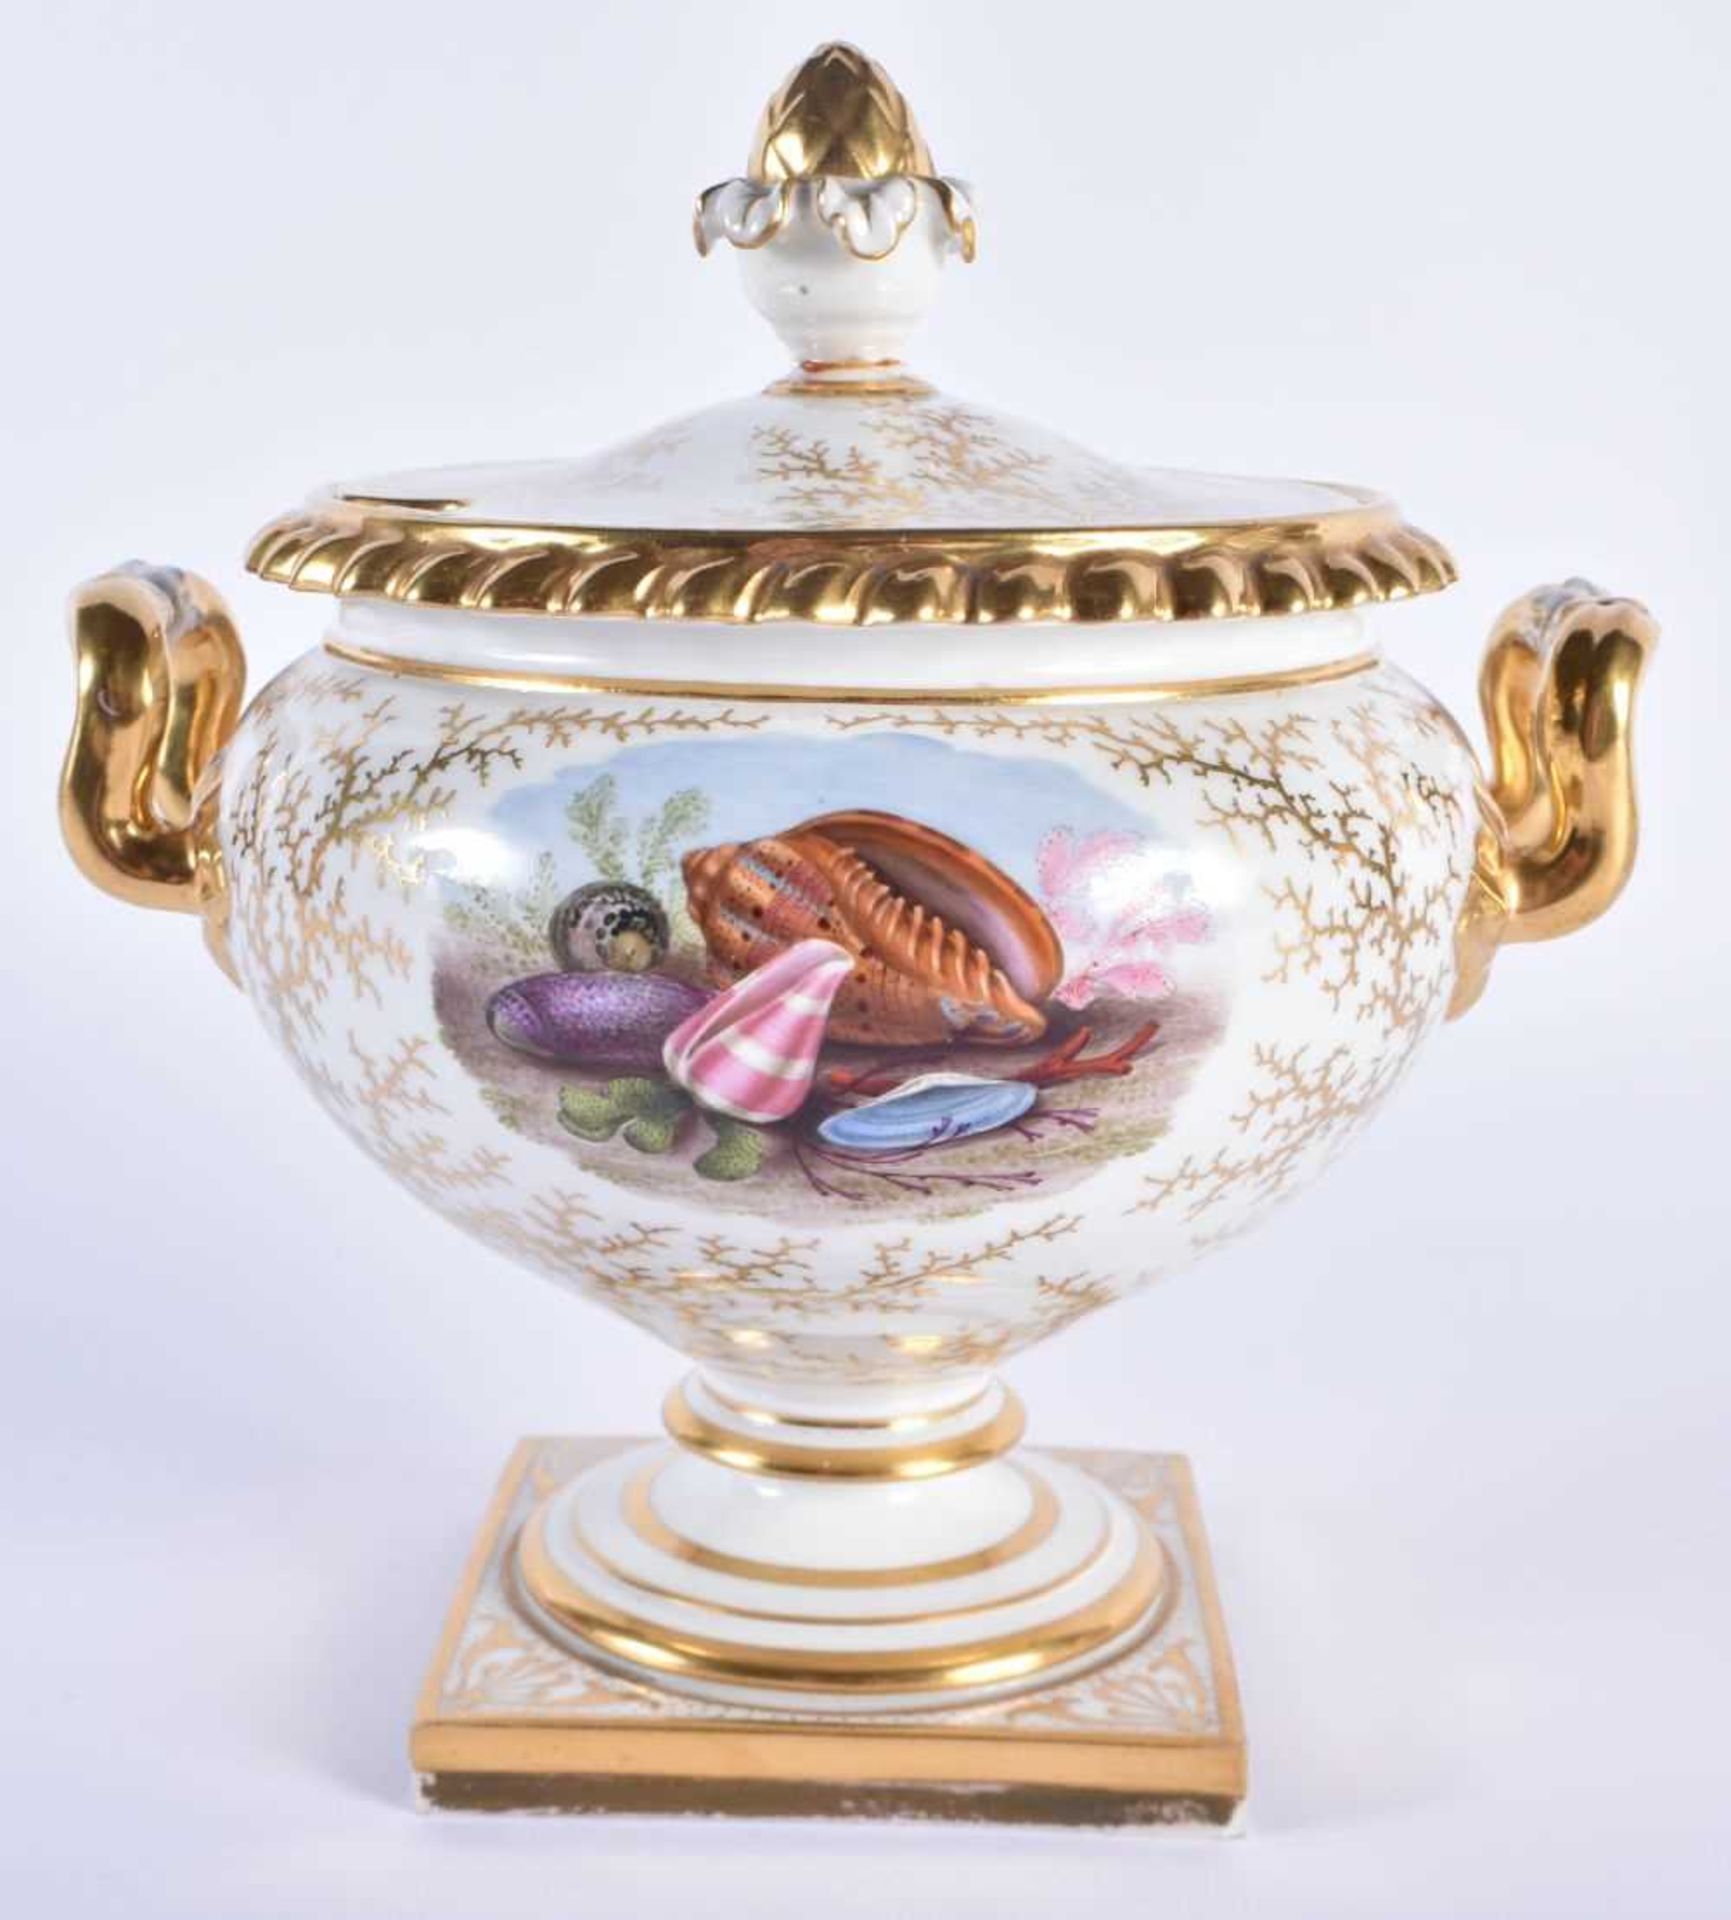 A FINE EARLY 19TH CENTURY FLIGHT BARR AND BARR WORCESTER DESSERT SERVICE painted with landscapes and - Image 9 of 32